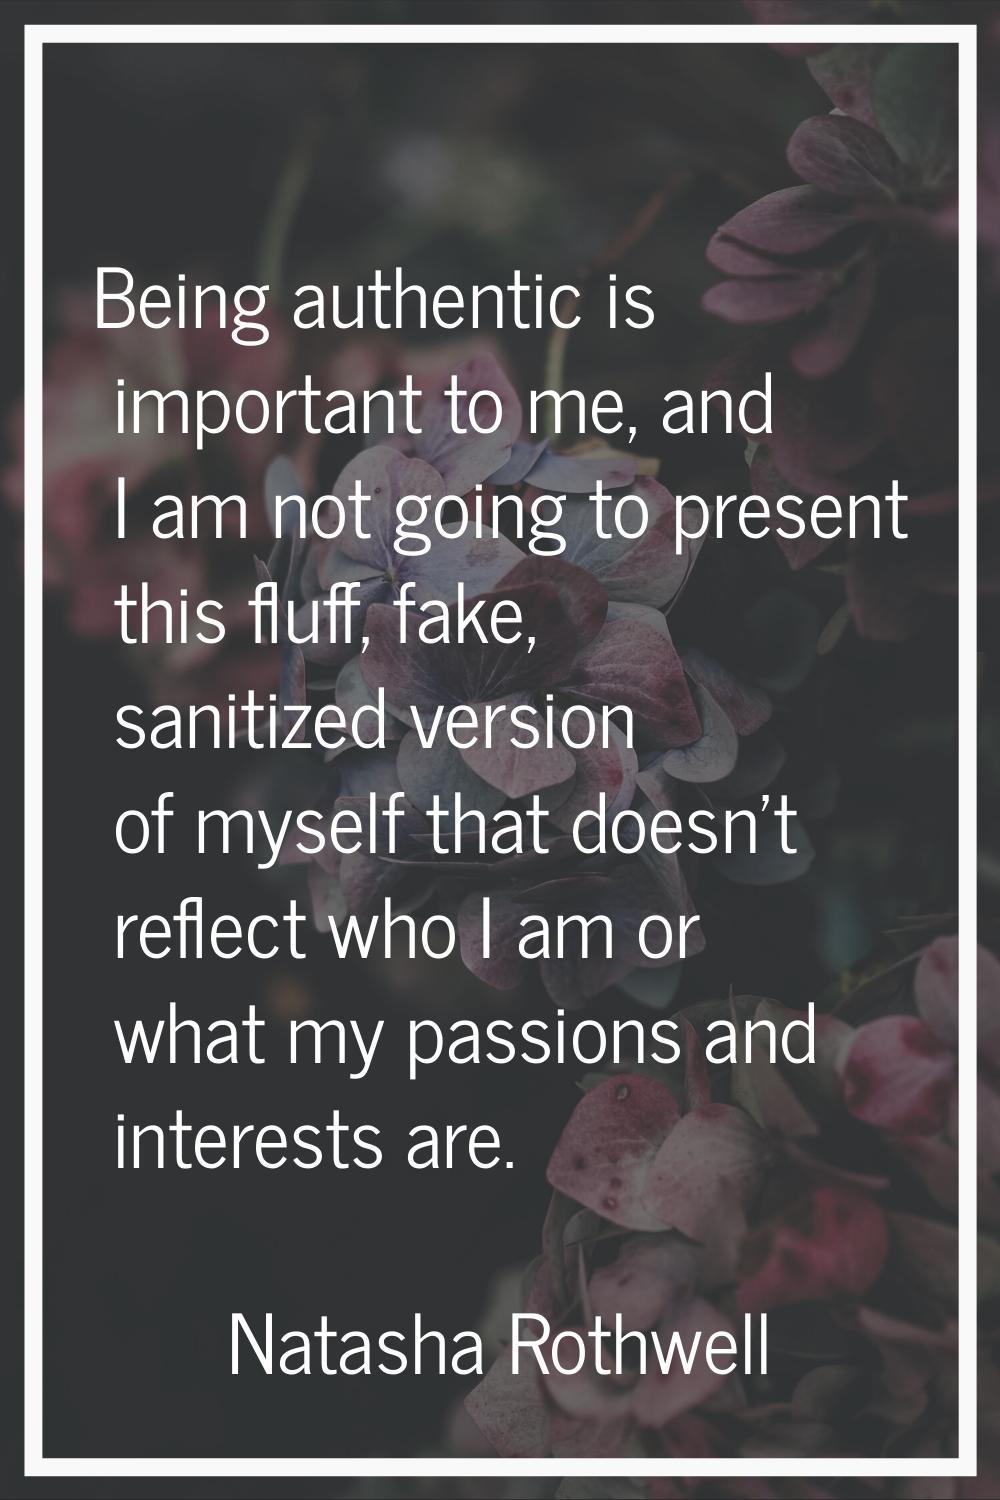 Being authentic is important to me, and I am not going to present this fluff, fake, sanitized versi